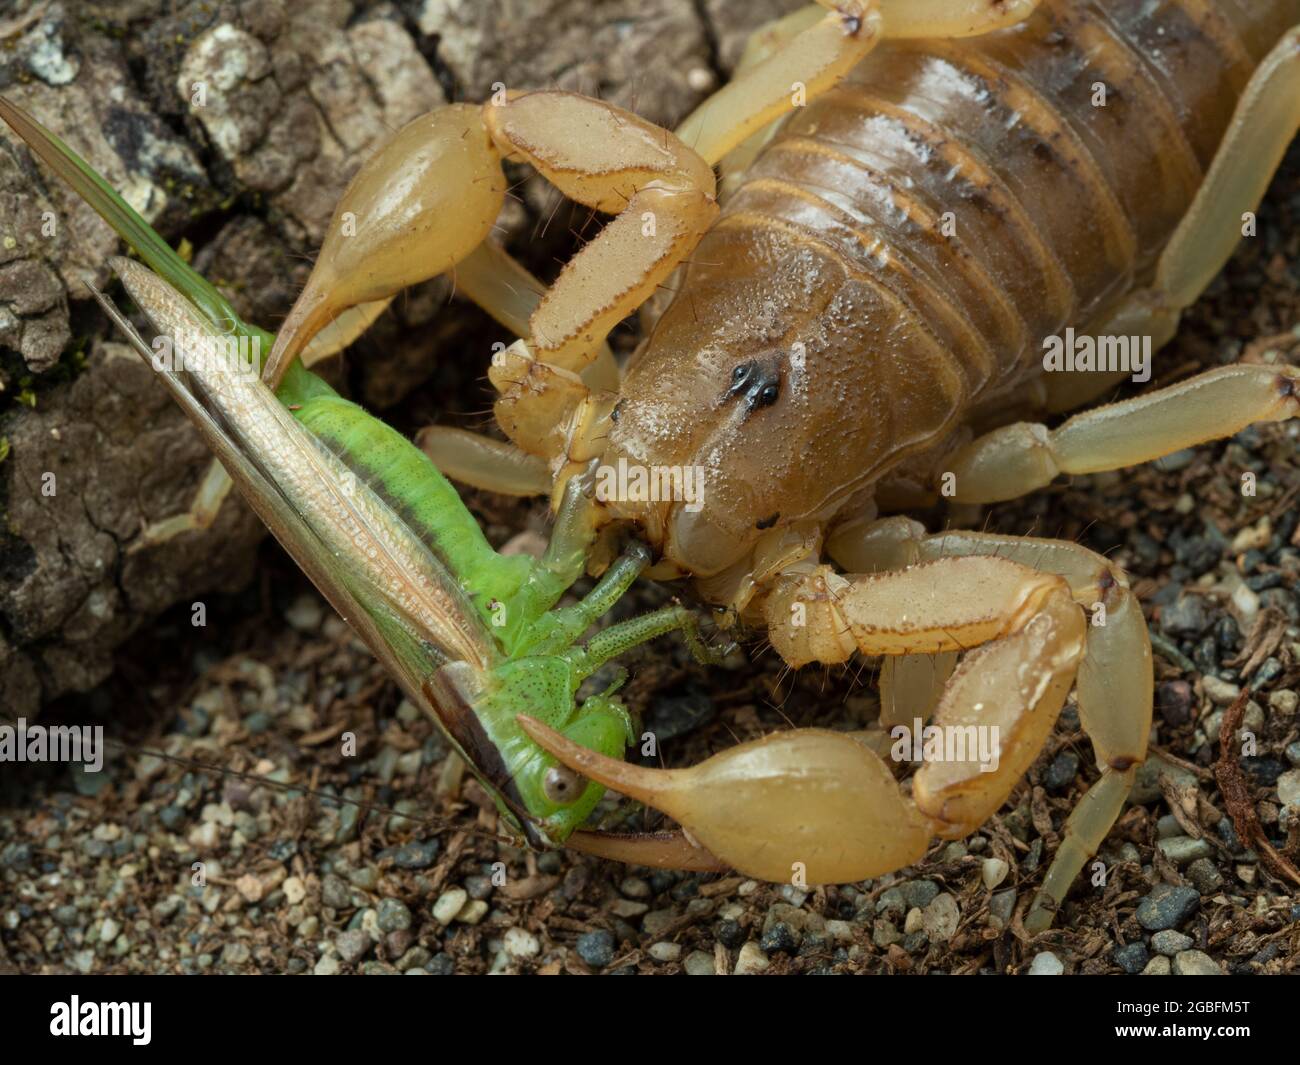 close up of an Arizona stripe-tailed scorpion, Paravaejovis spinigerus, eating a green katydid that it has captured and killed Stock Photo